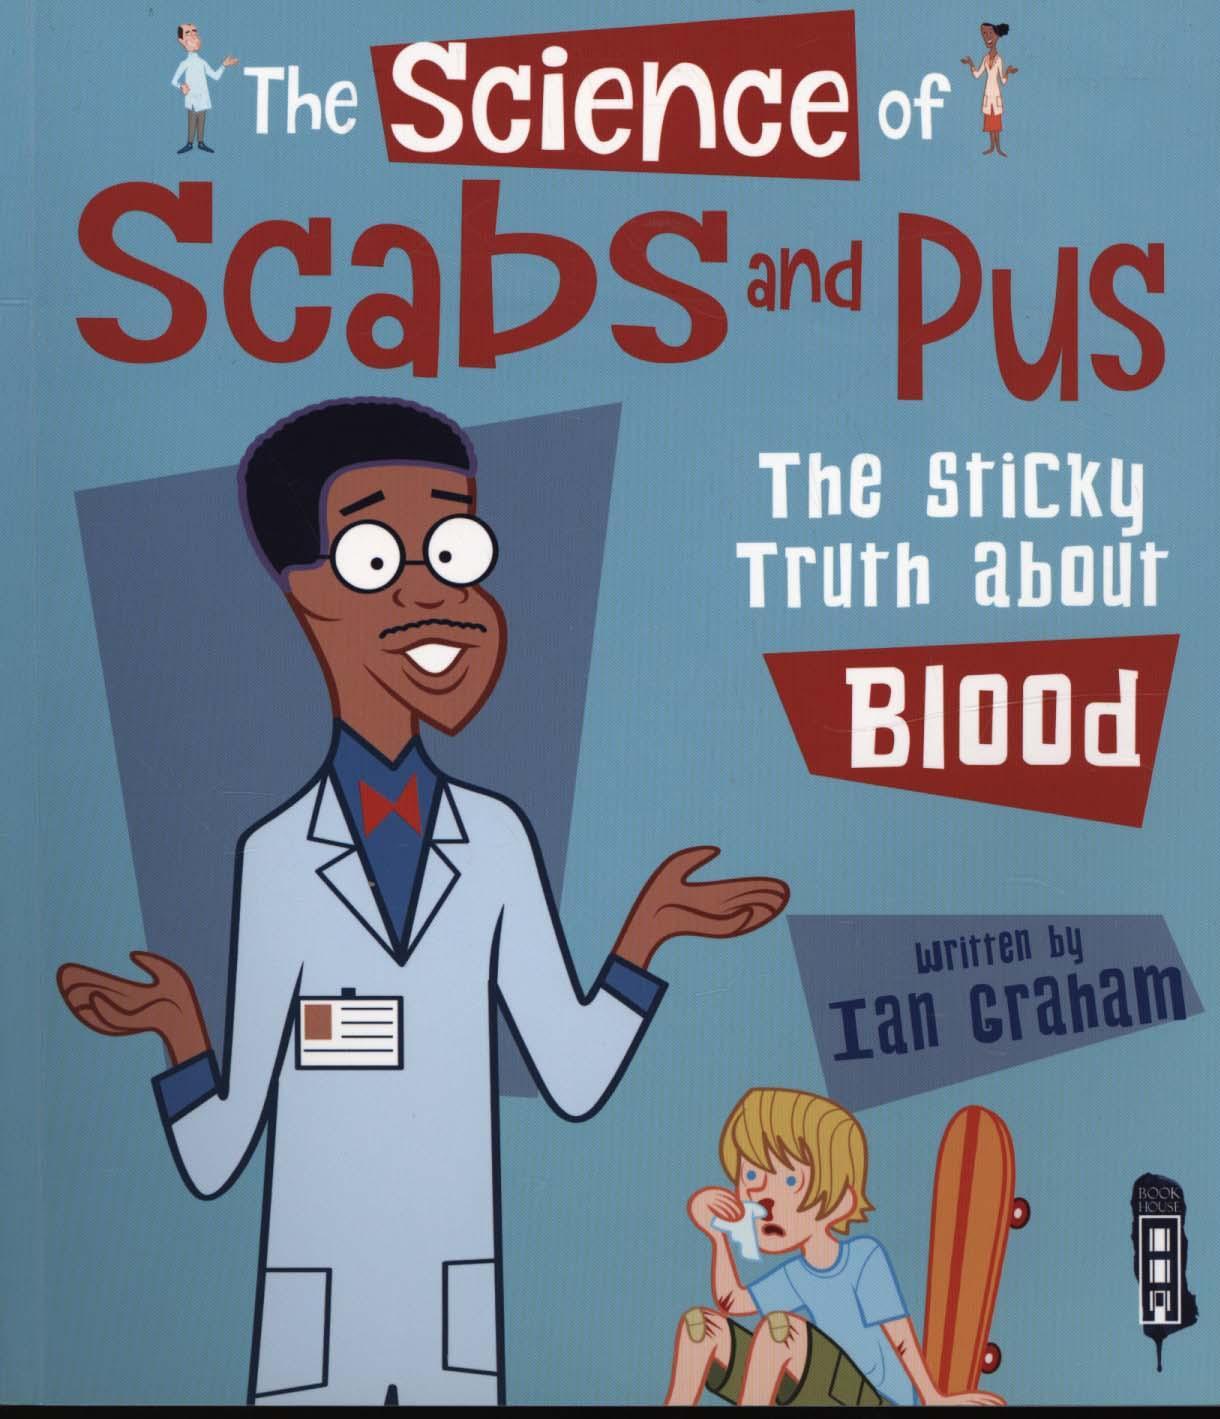 Science of Scabs & Pus